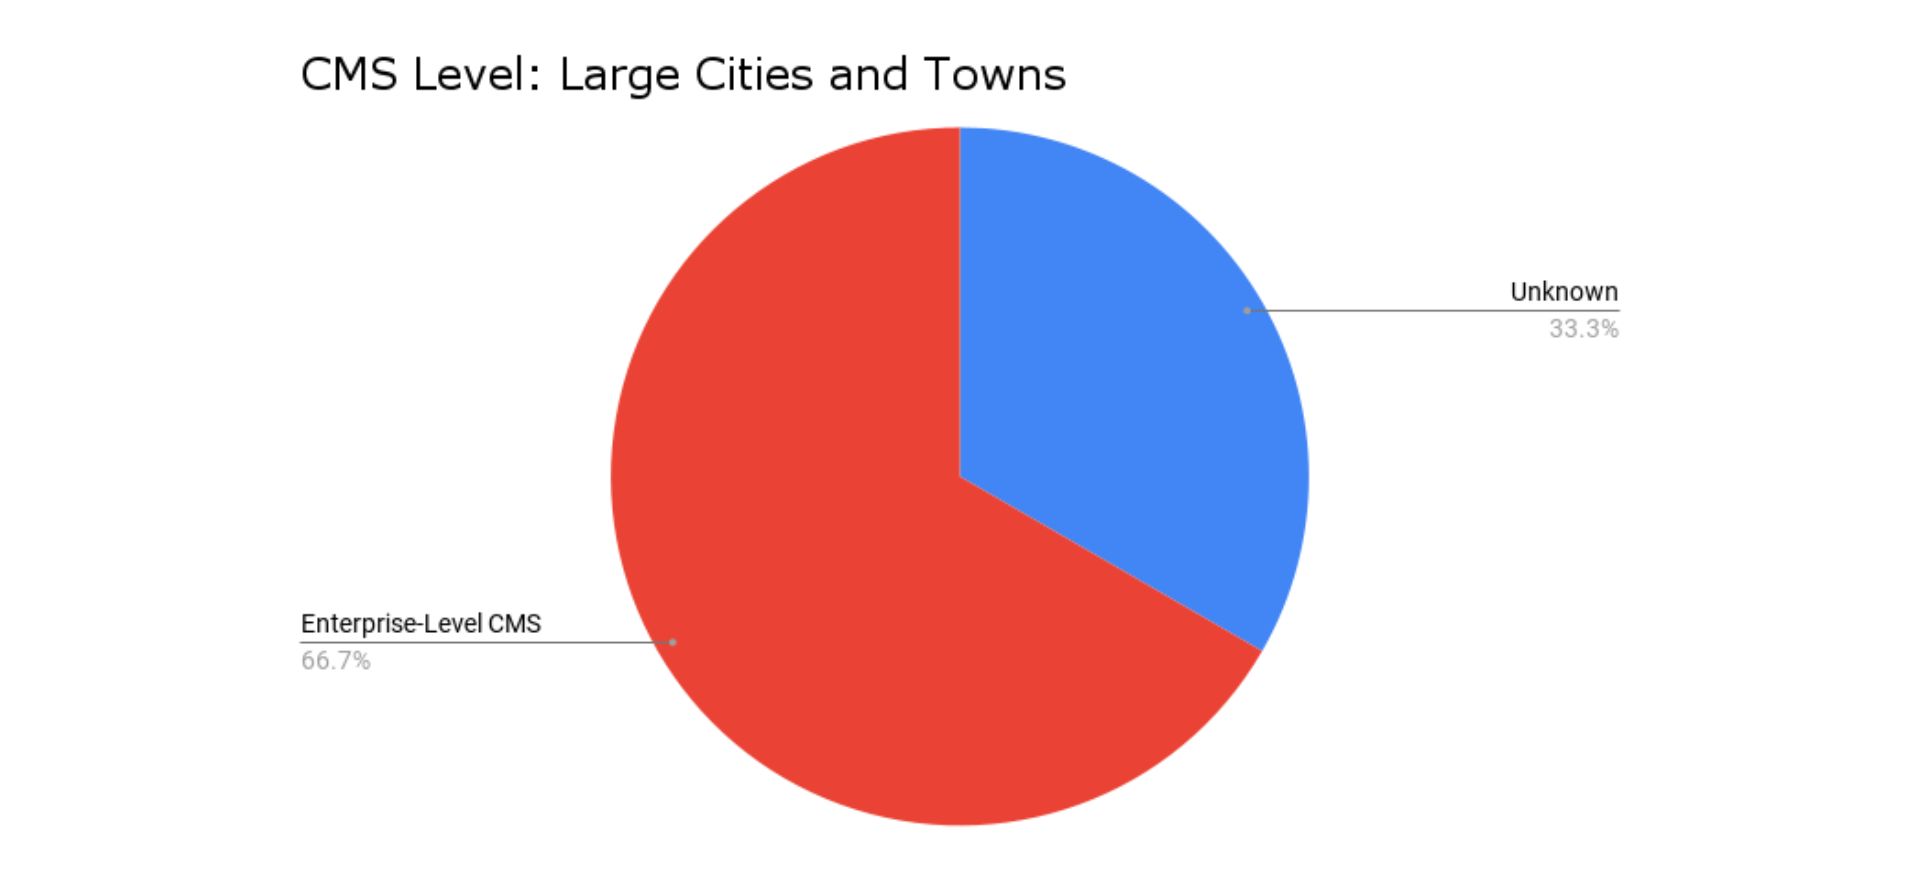 cms level: large cities